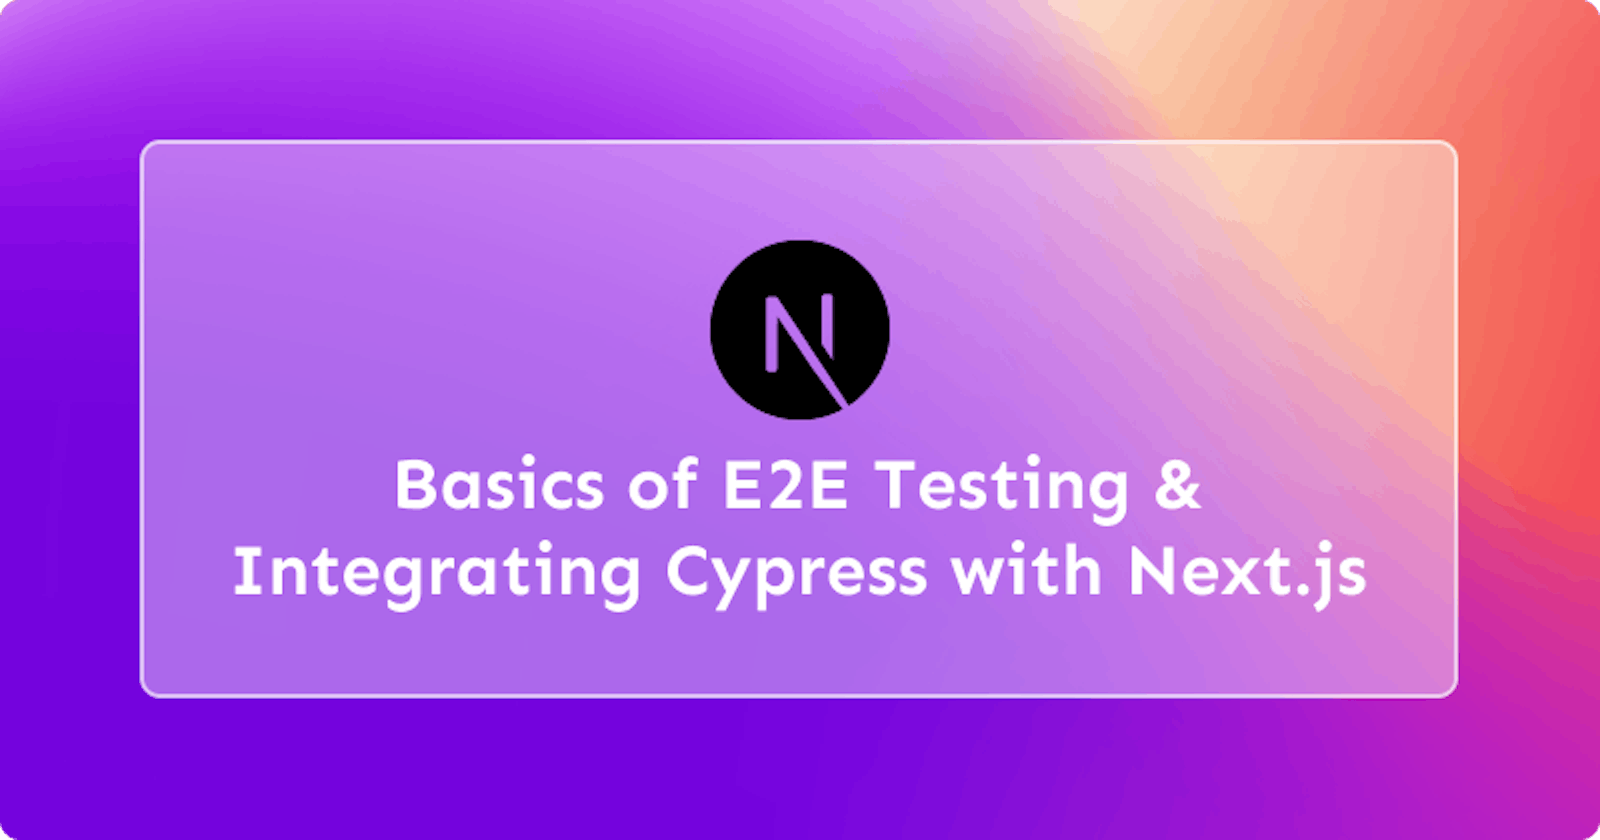 Basics of E2E Testing and Integrating Cypress with Next.js